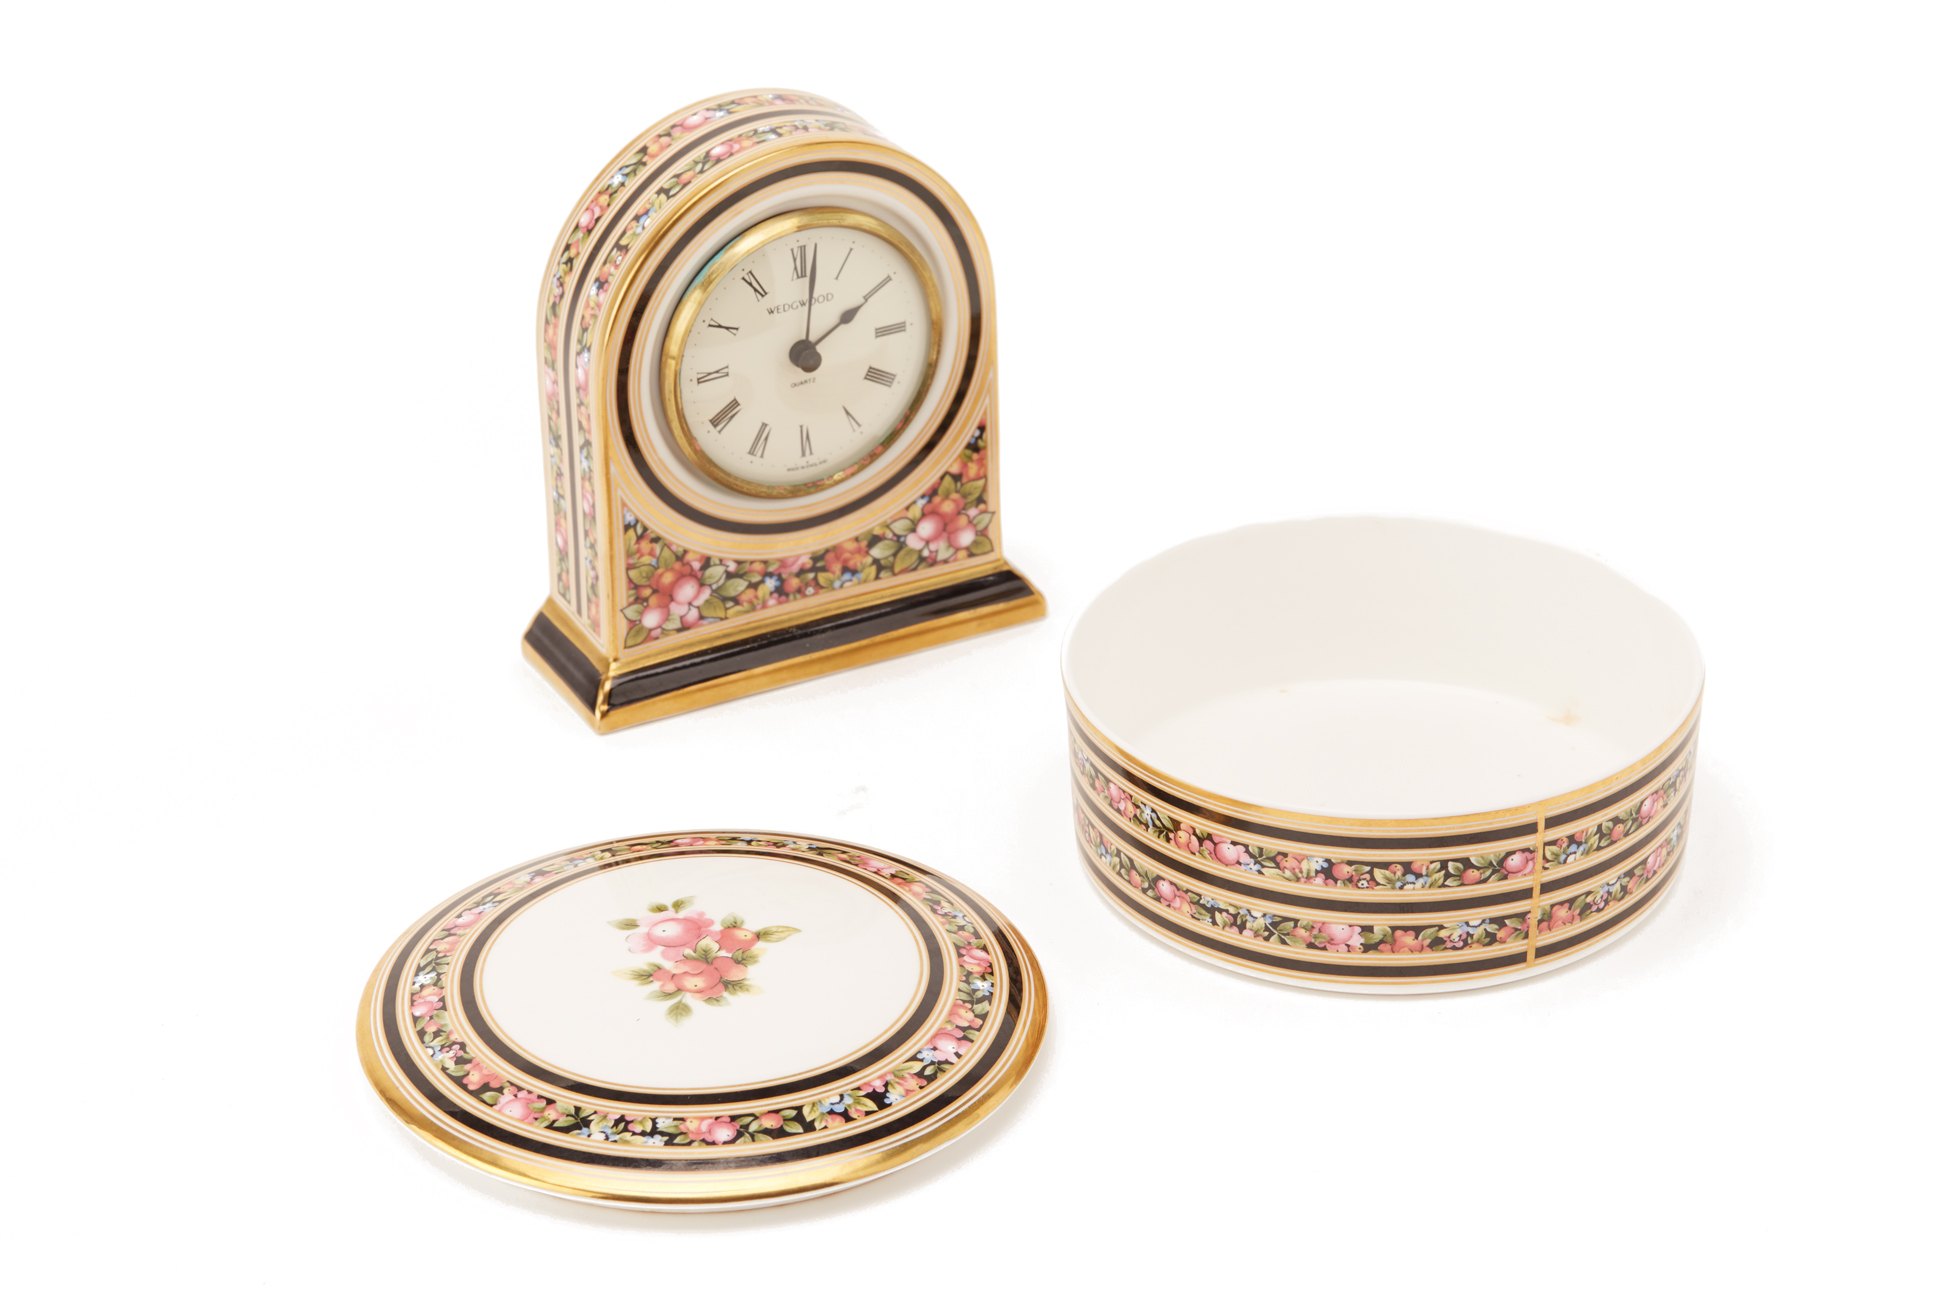 A WEDGWOOD MANTLE CLOCK AND OTHER ITEMS - Image 2 of 3